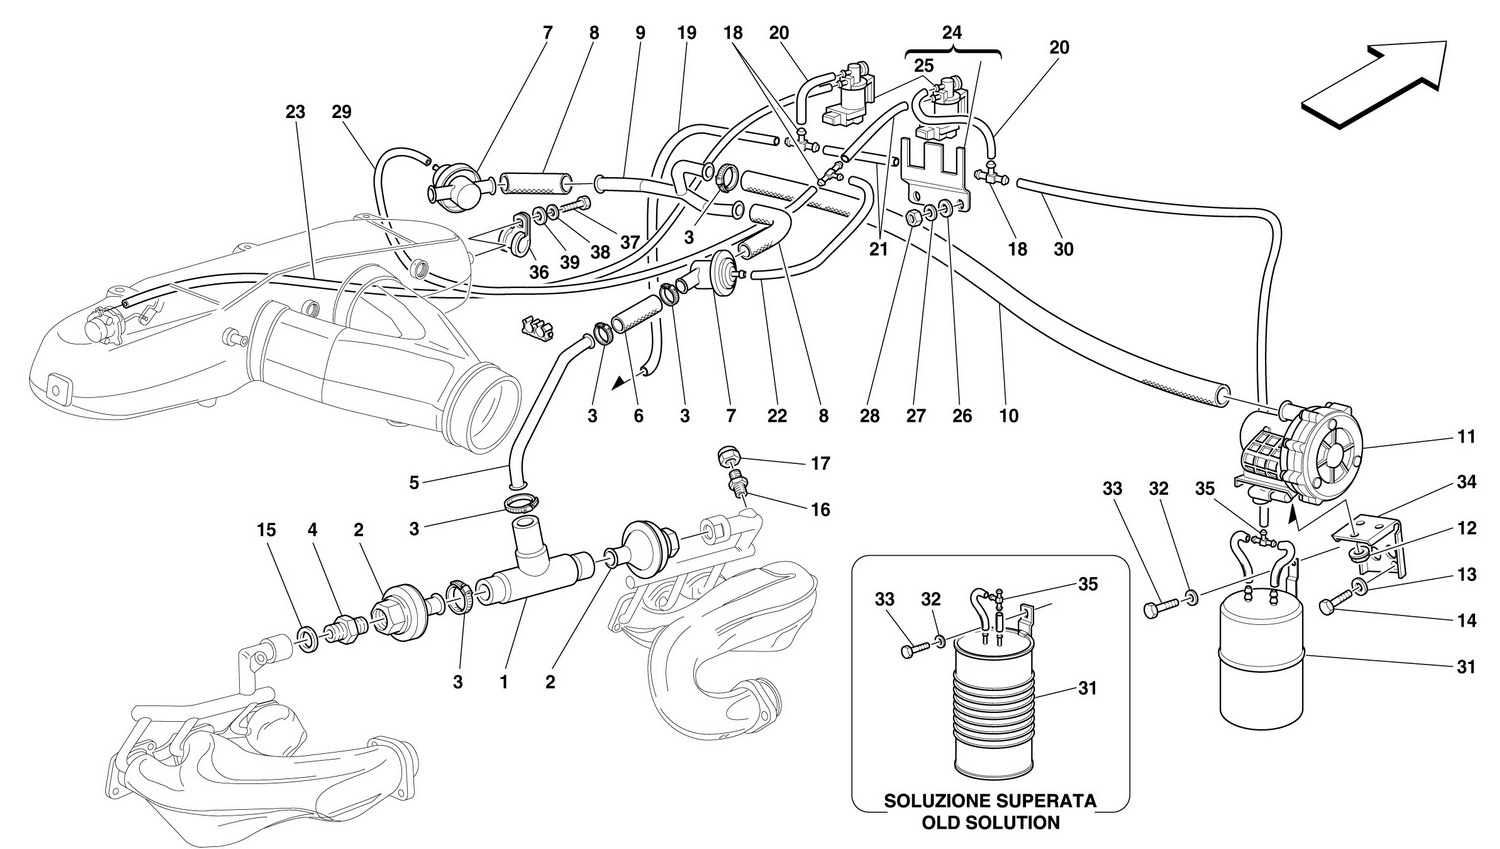 Schematic: Air Injection Device